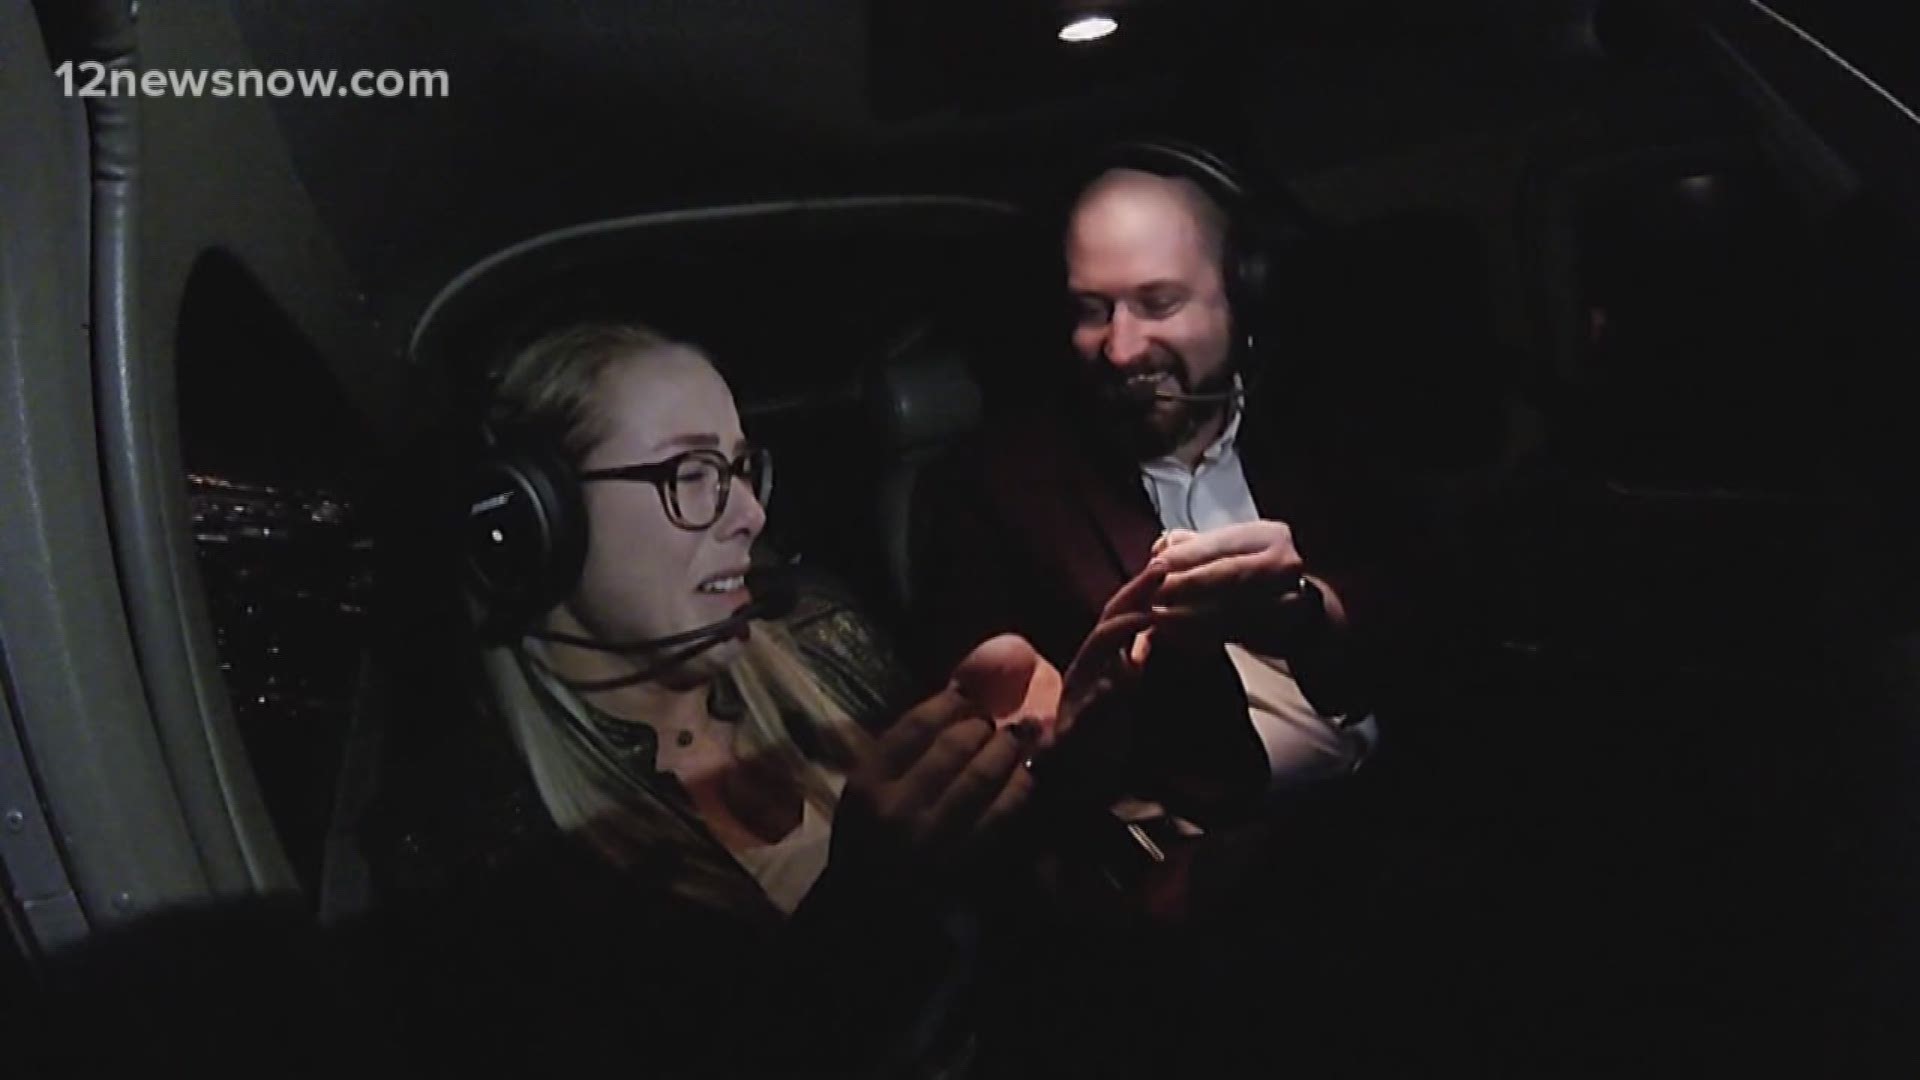 One woman got the surprise of a lifetime while flying over Christmas light displays in North Texas